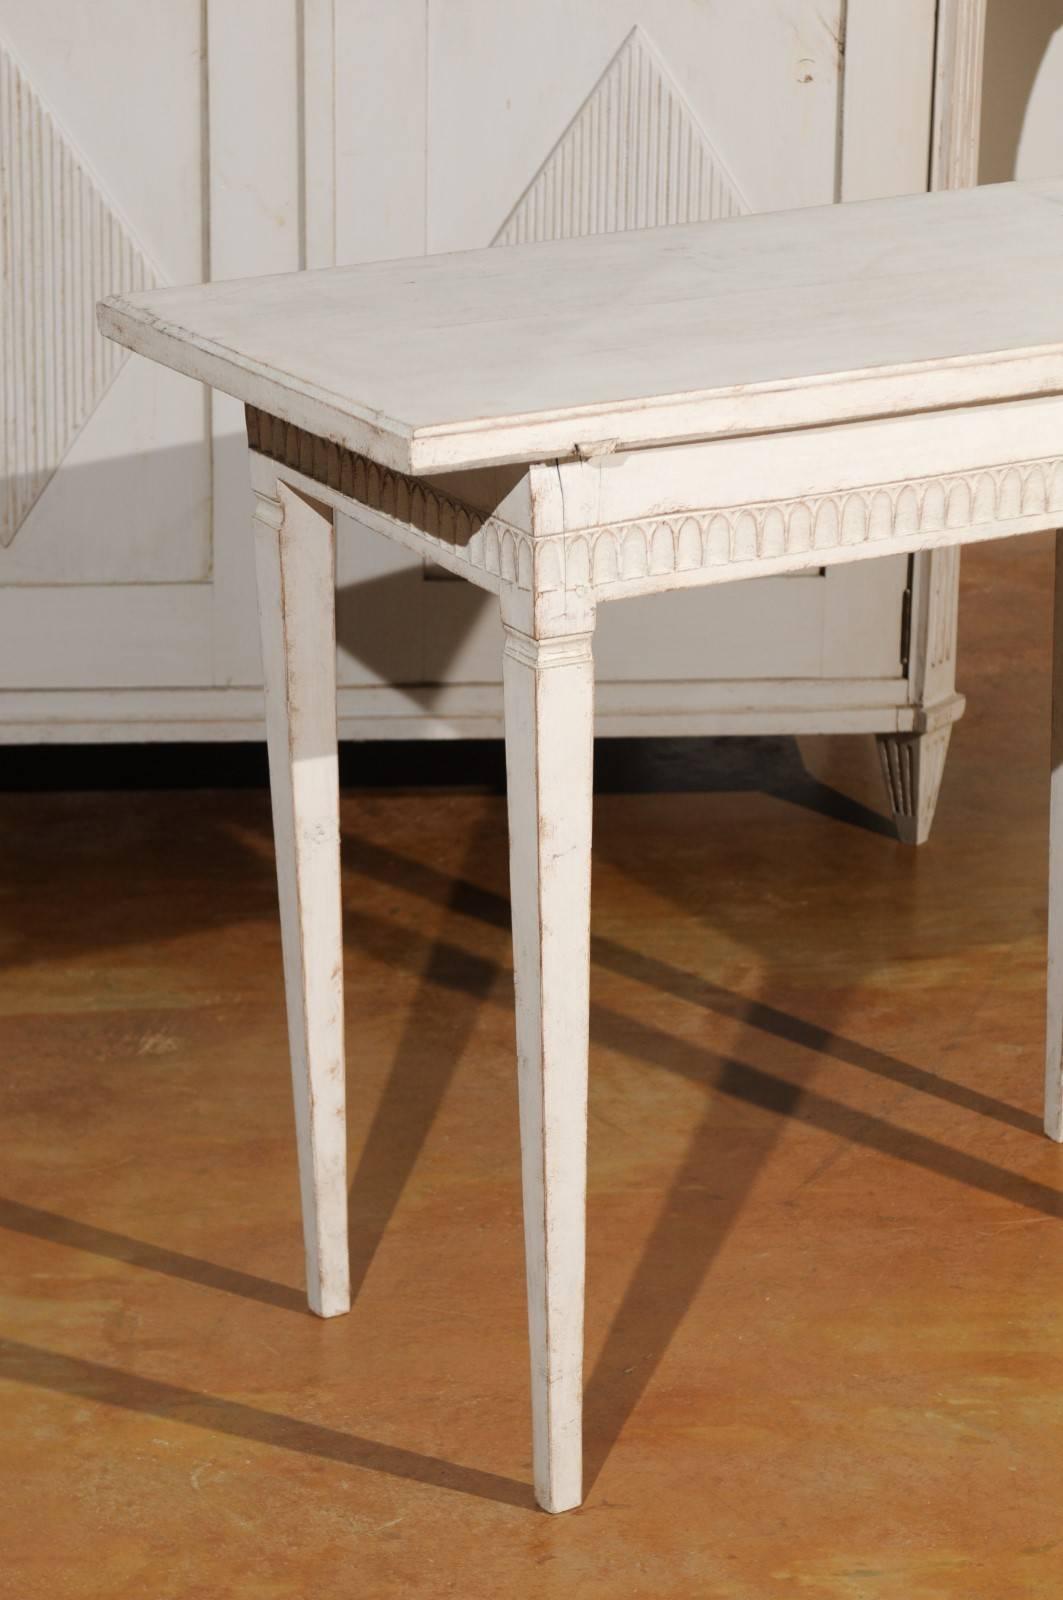 19th Century Neoclassical Swedish 1840s Painted Side Table with Carved Apron and Tapered Legs